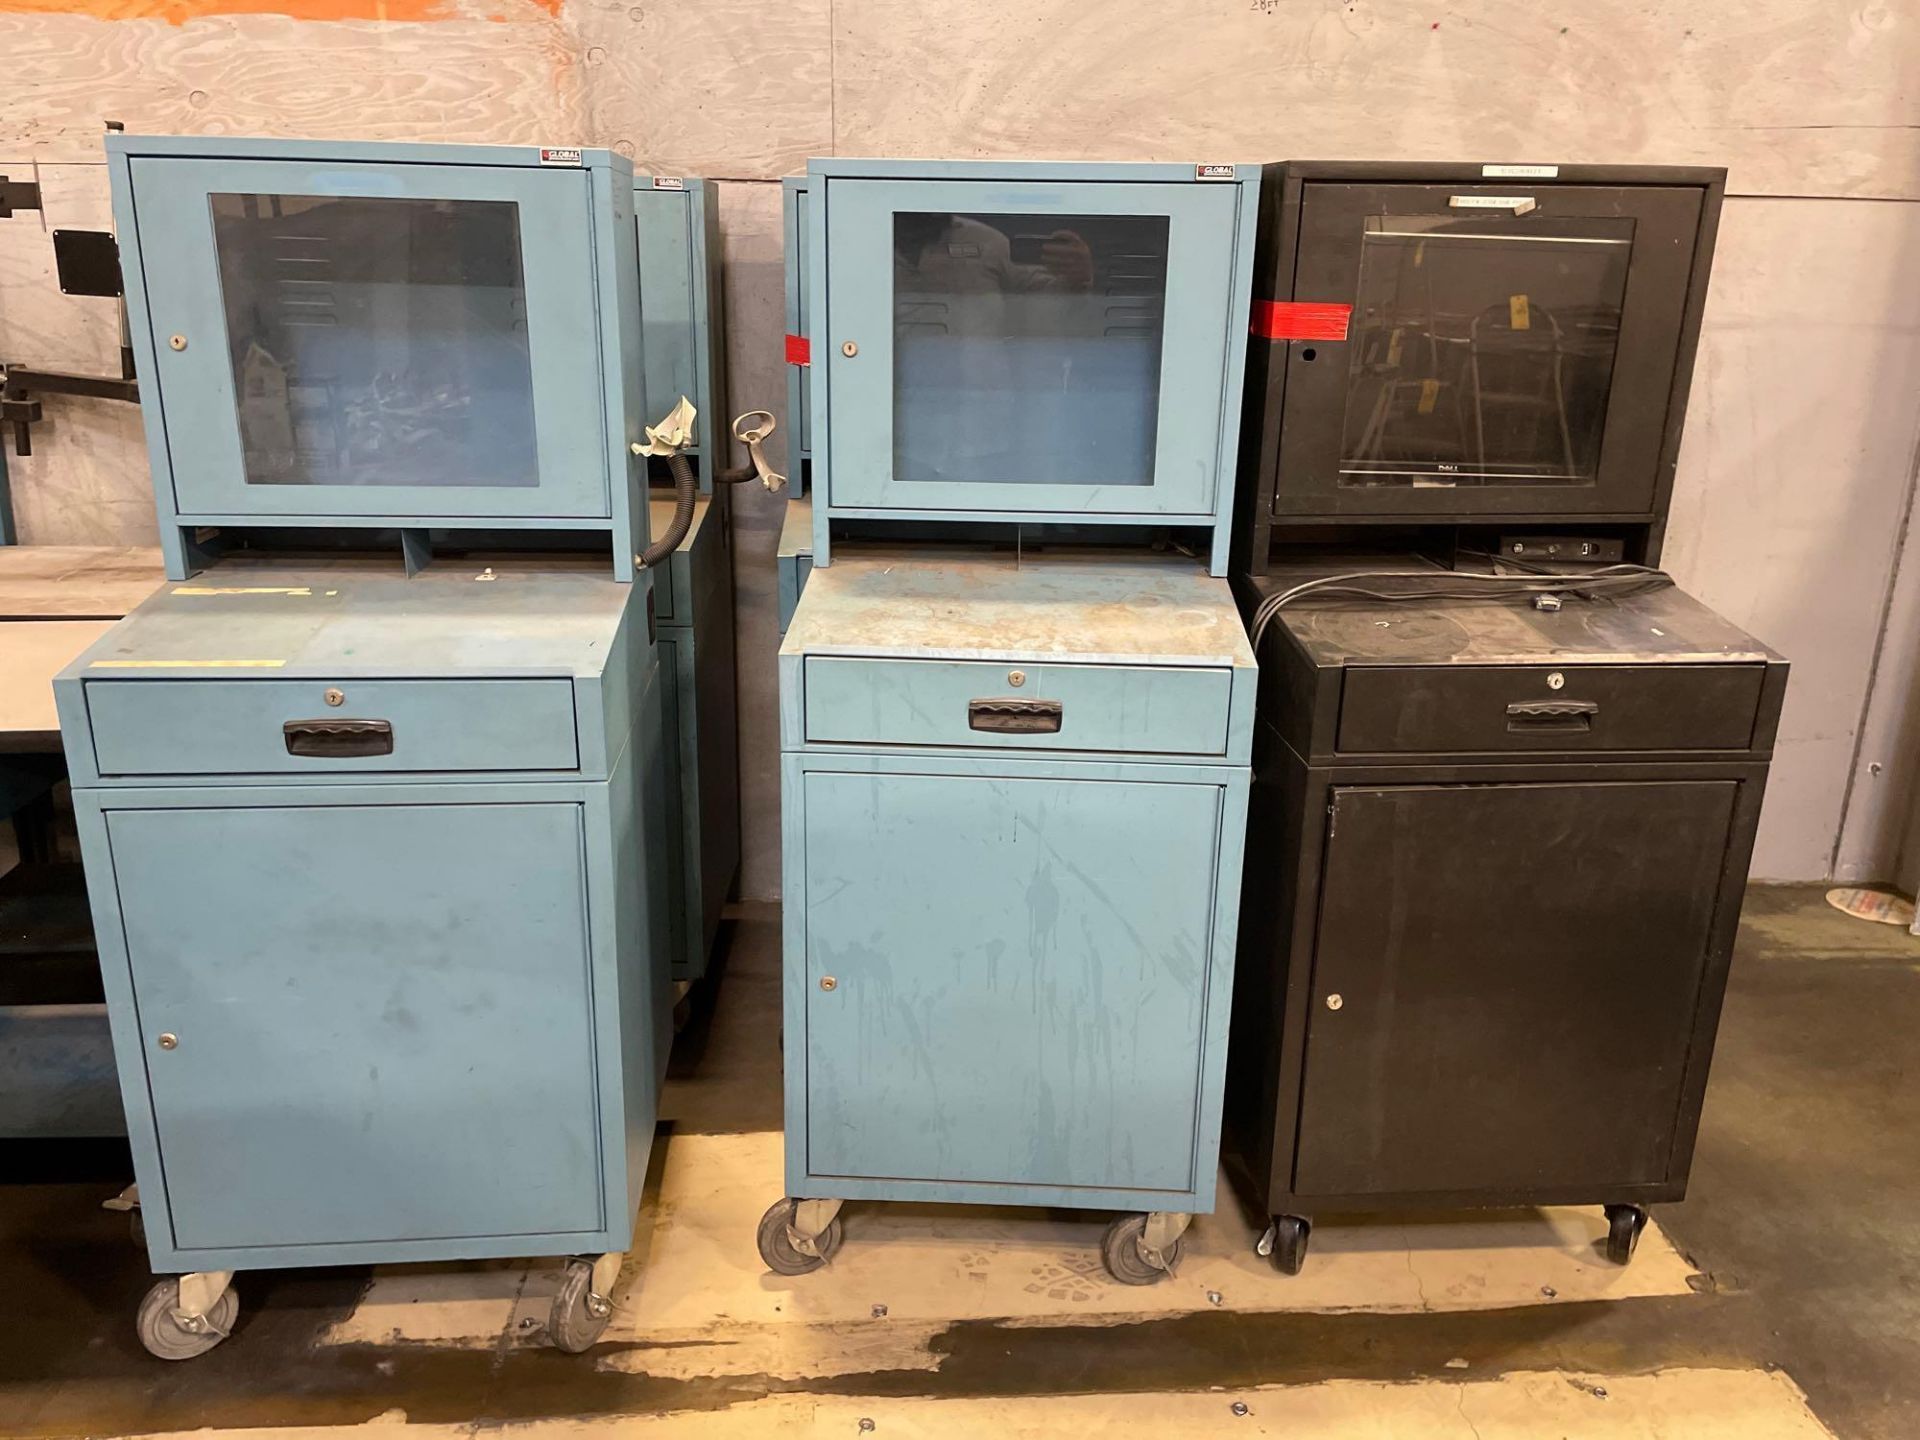 Lot of 3: Global Computer Cabinets on Casters with Scanner Holder, 23" X 25" X 63" - Image 3 of 5